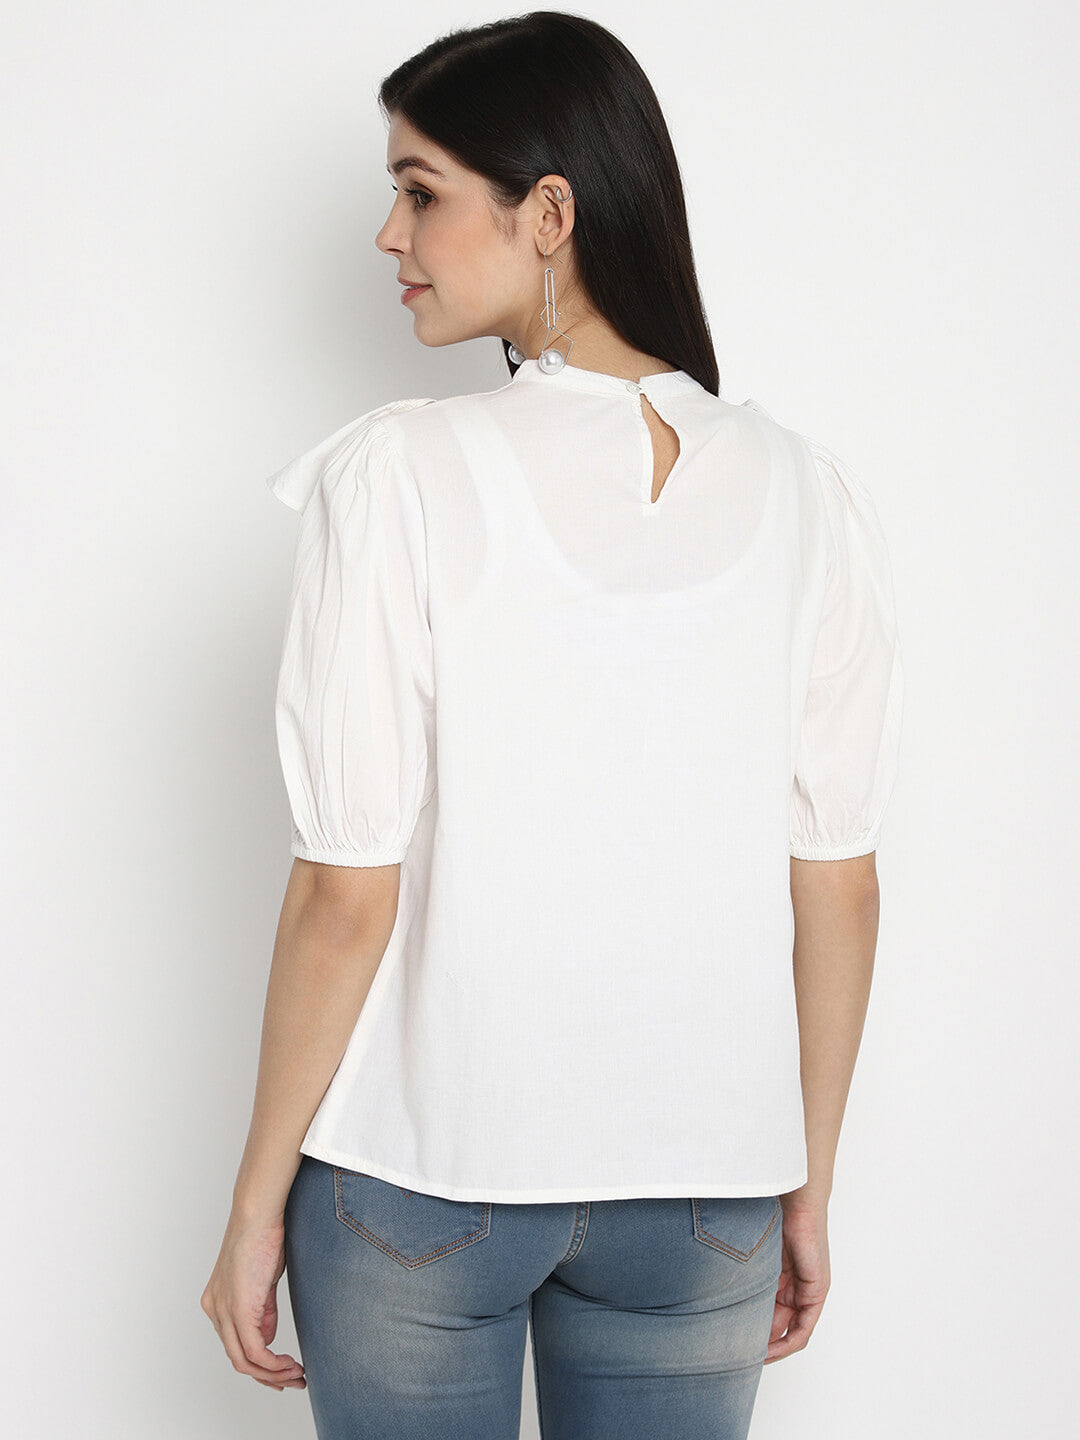 White Solid Cotton Poplin Top With Ruffles At Yoke